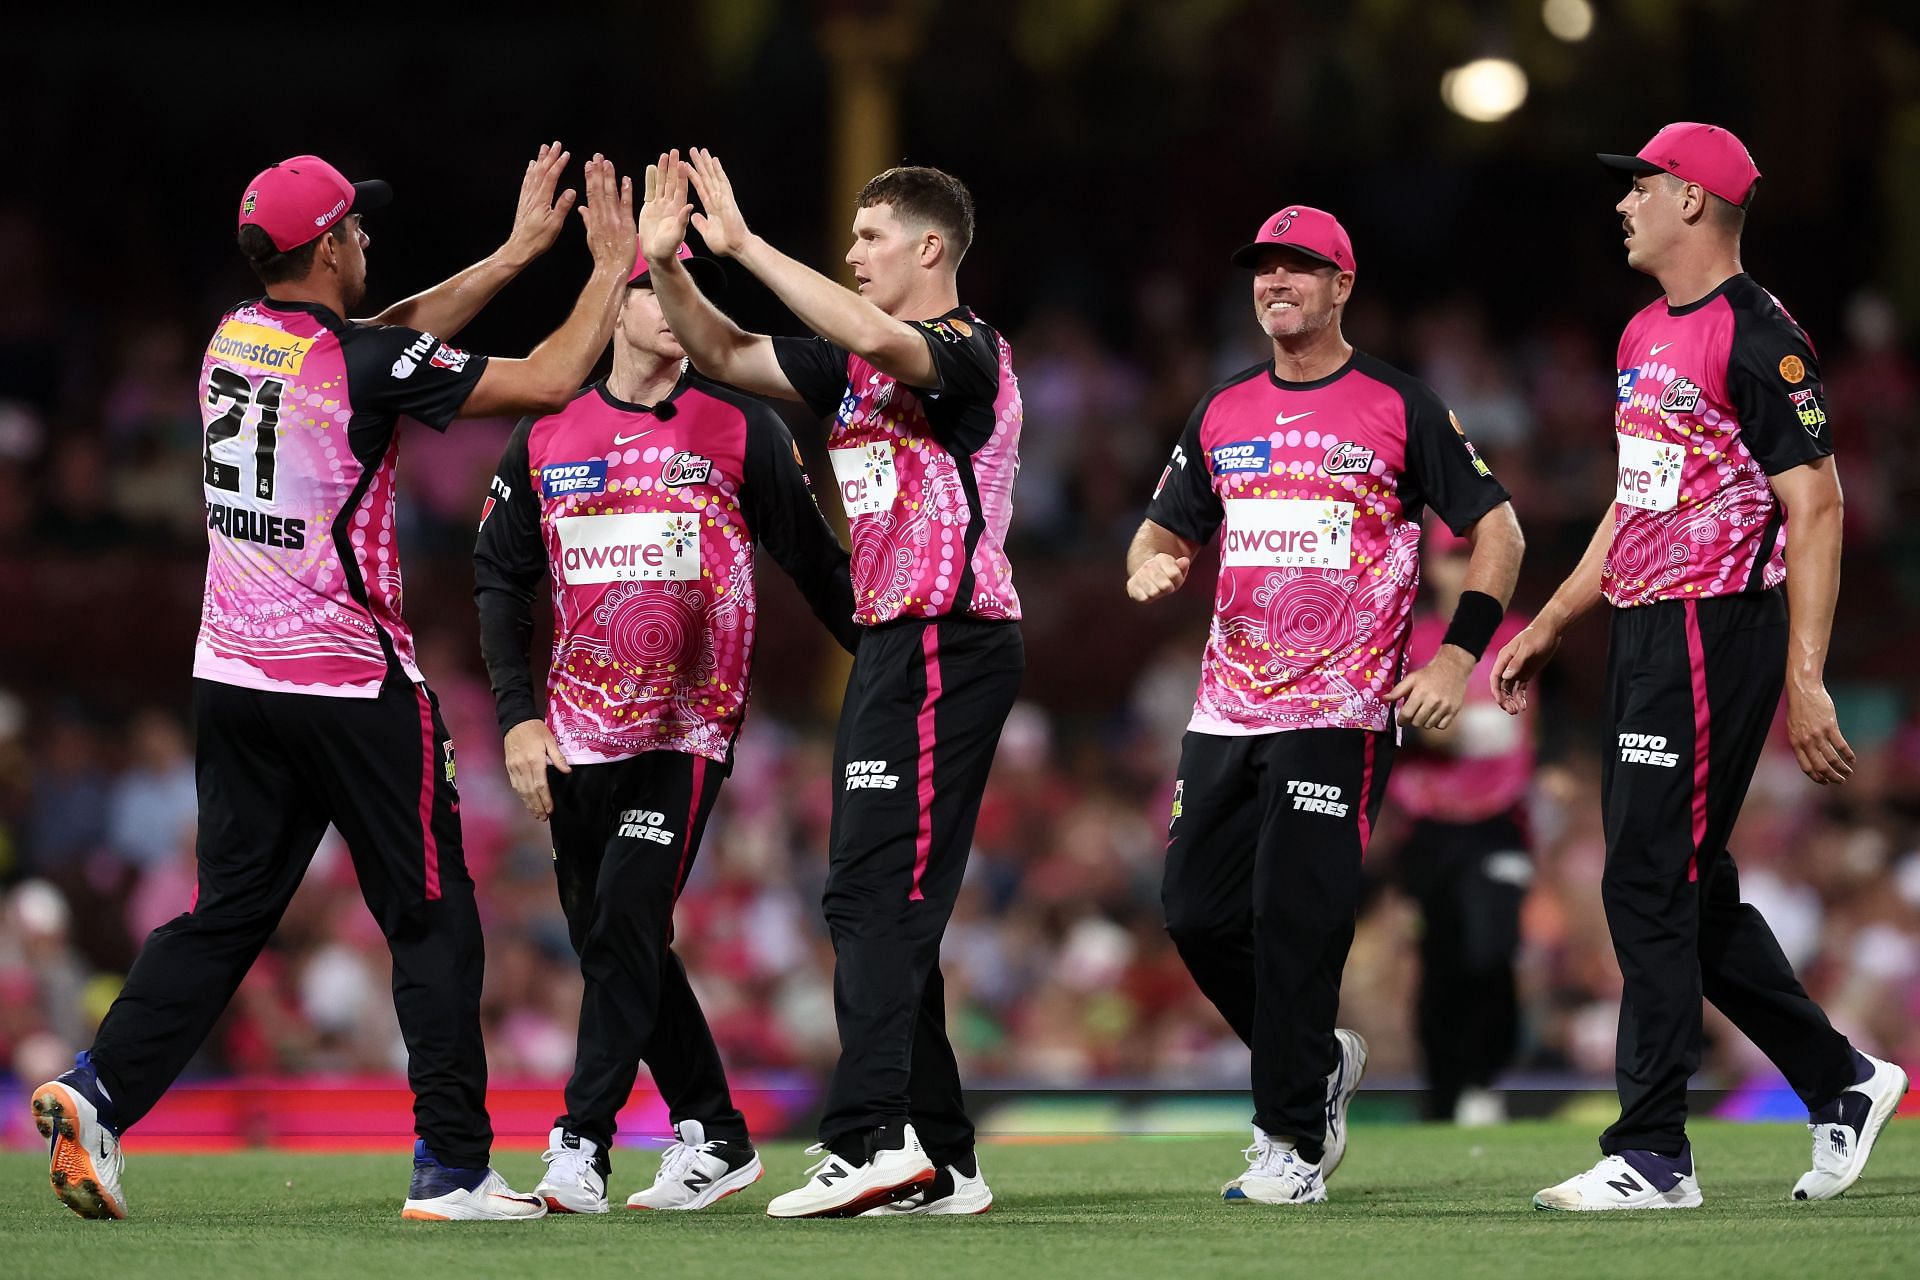 Sydney Sixers. (Image Credits: Getty)